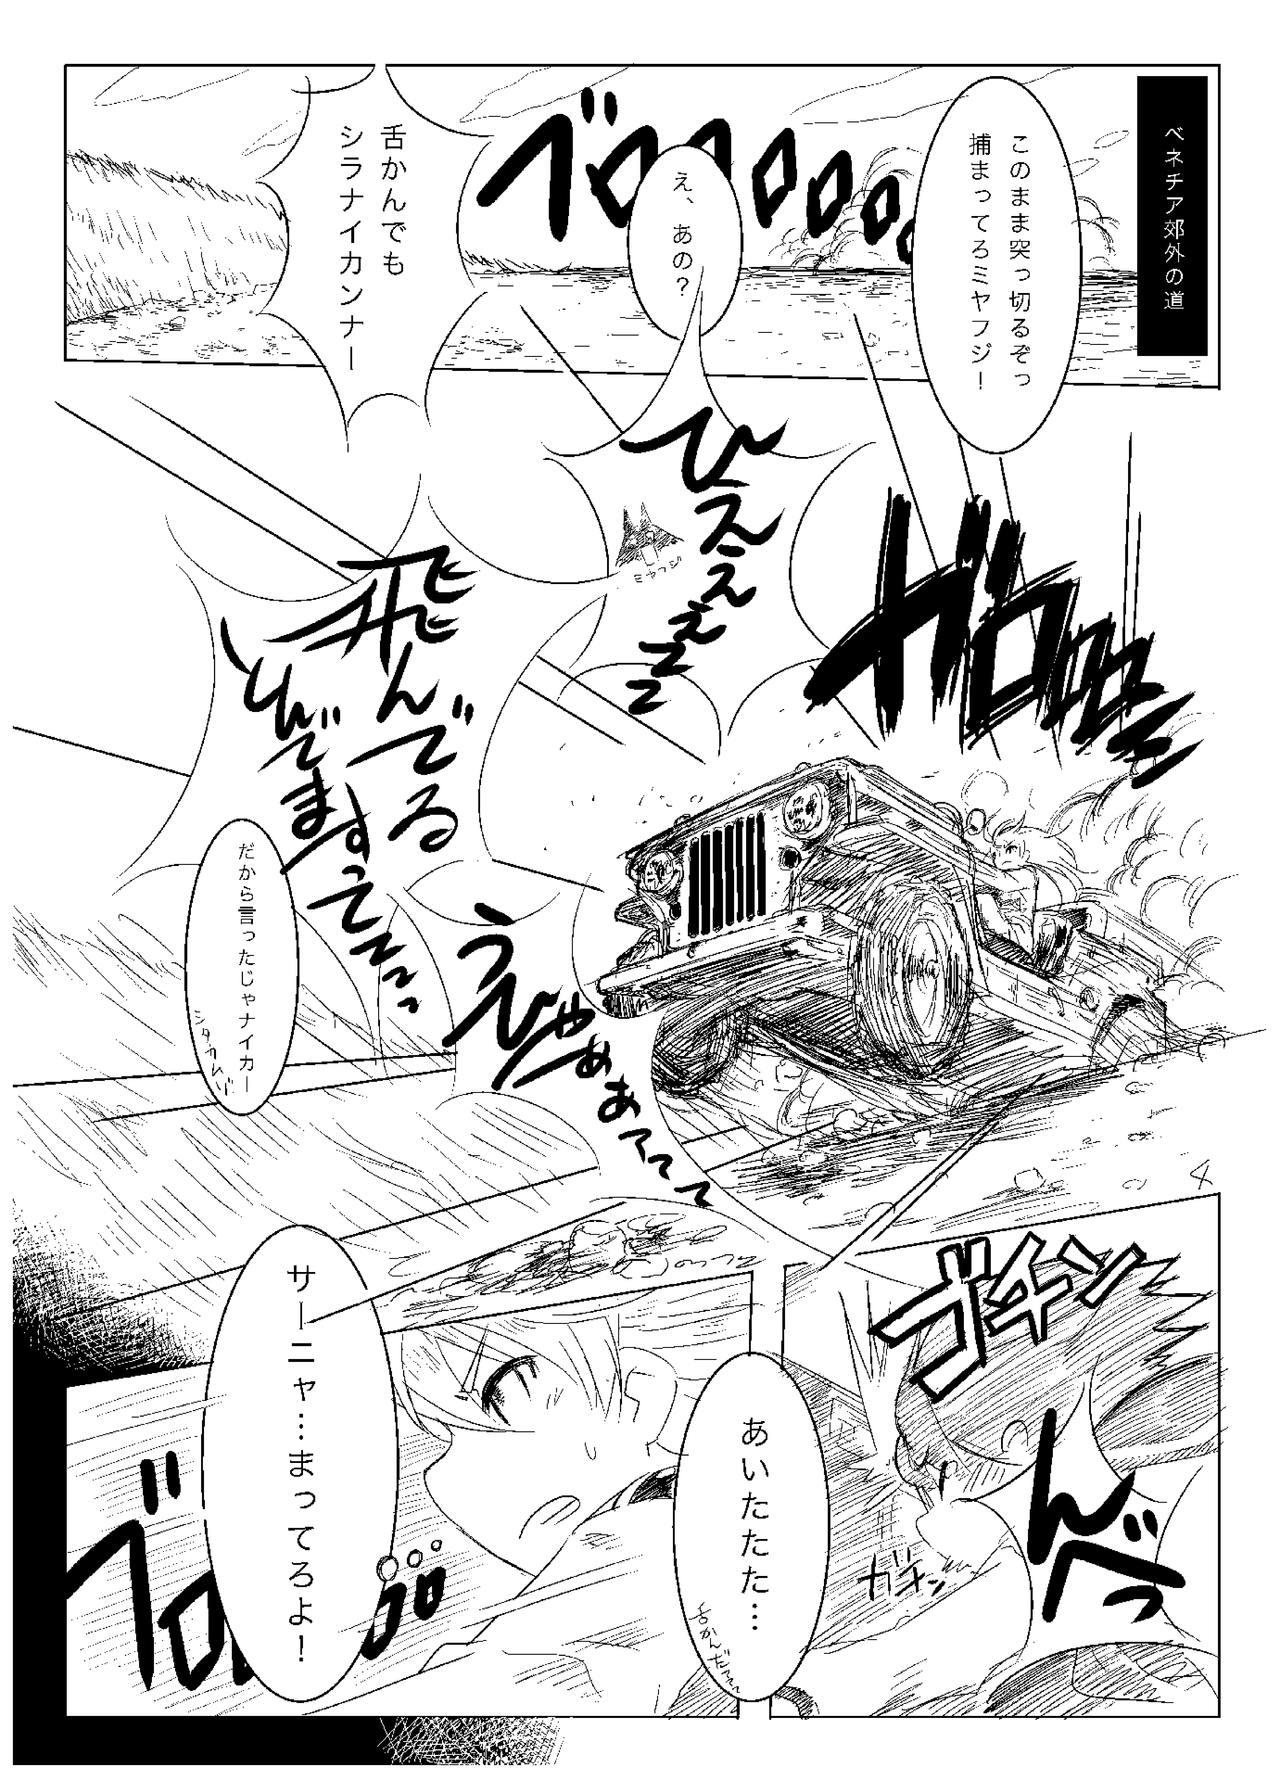 Hot Mom Starlight MilkyWay 2 - Strike witches Thot - Page 3